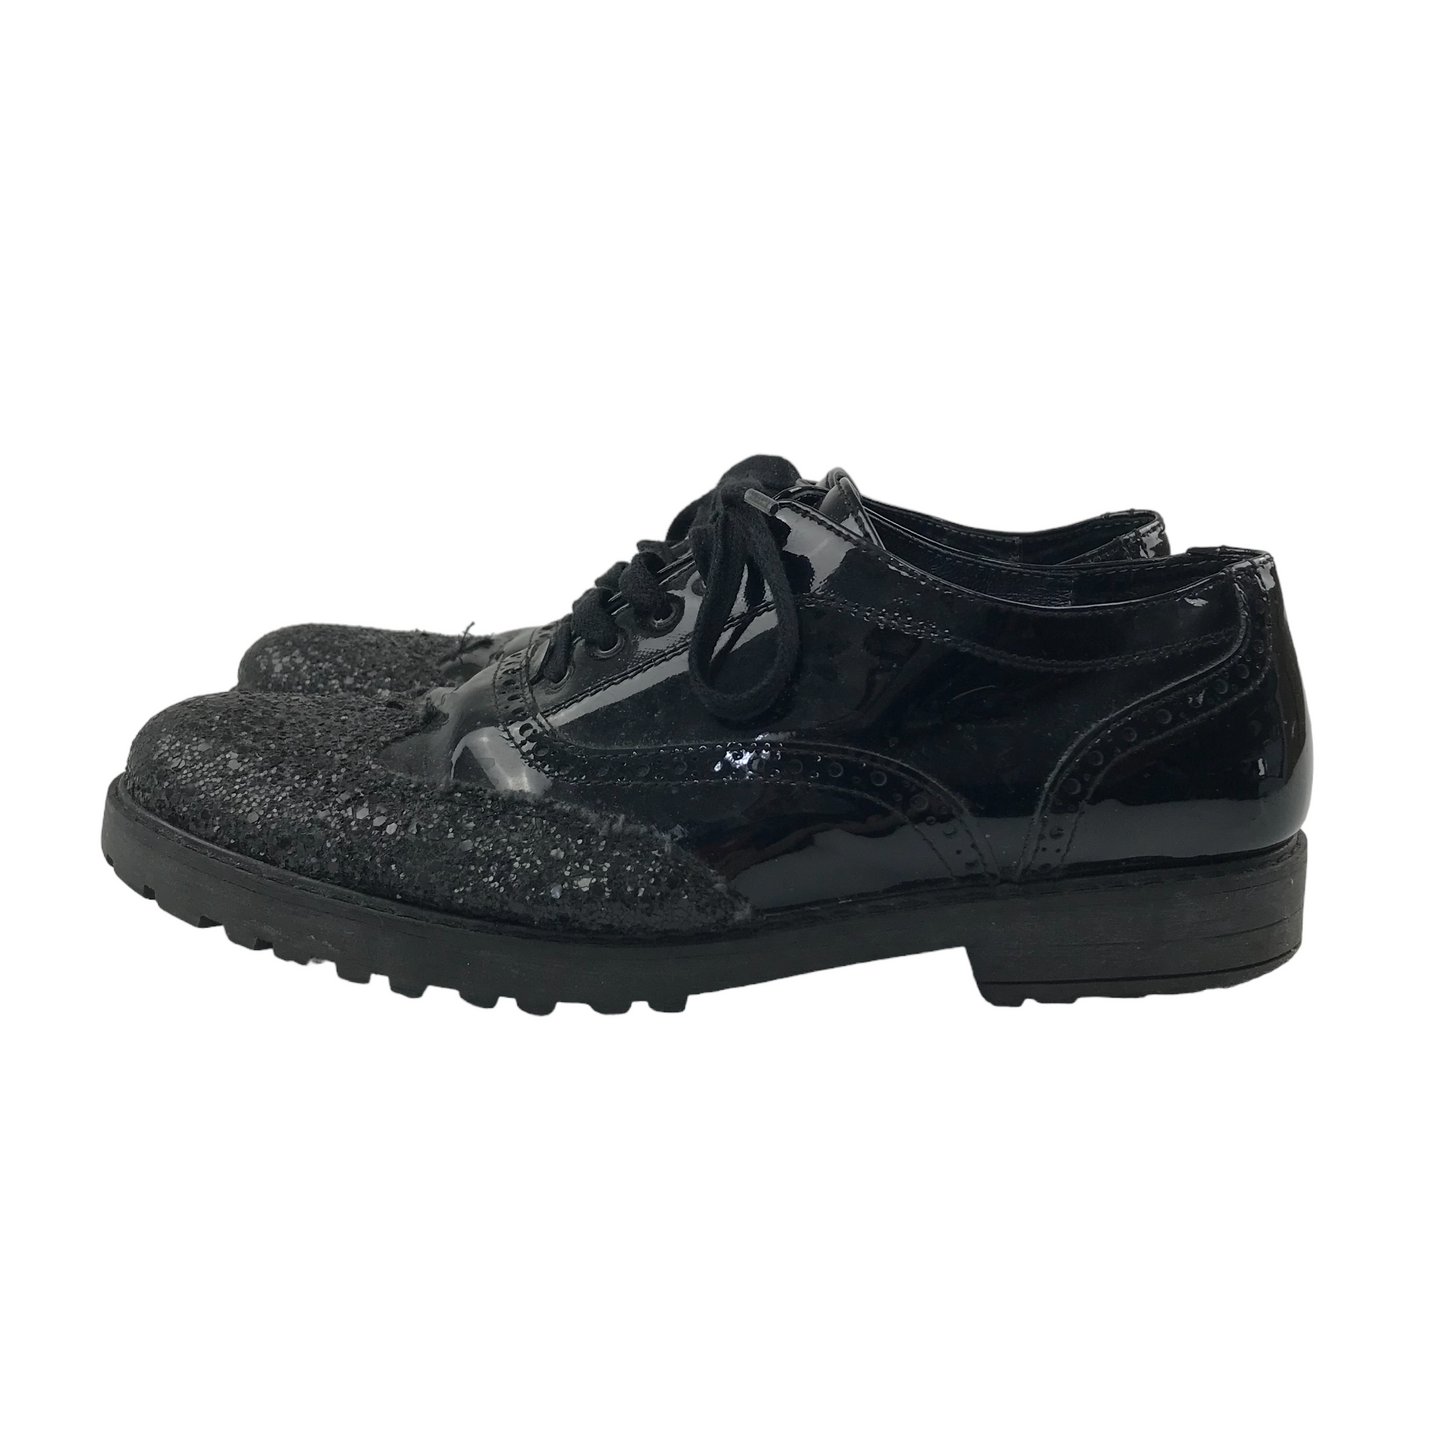 Black Glitter Tips Shoes Shoe Size 5 with Laces